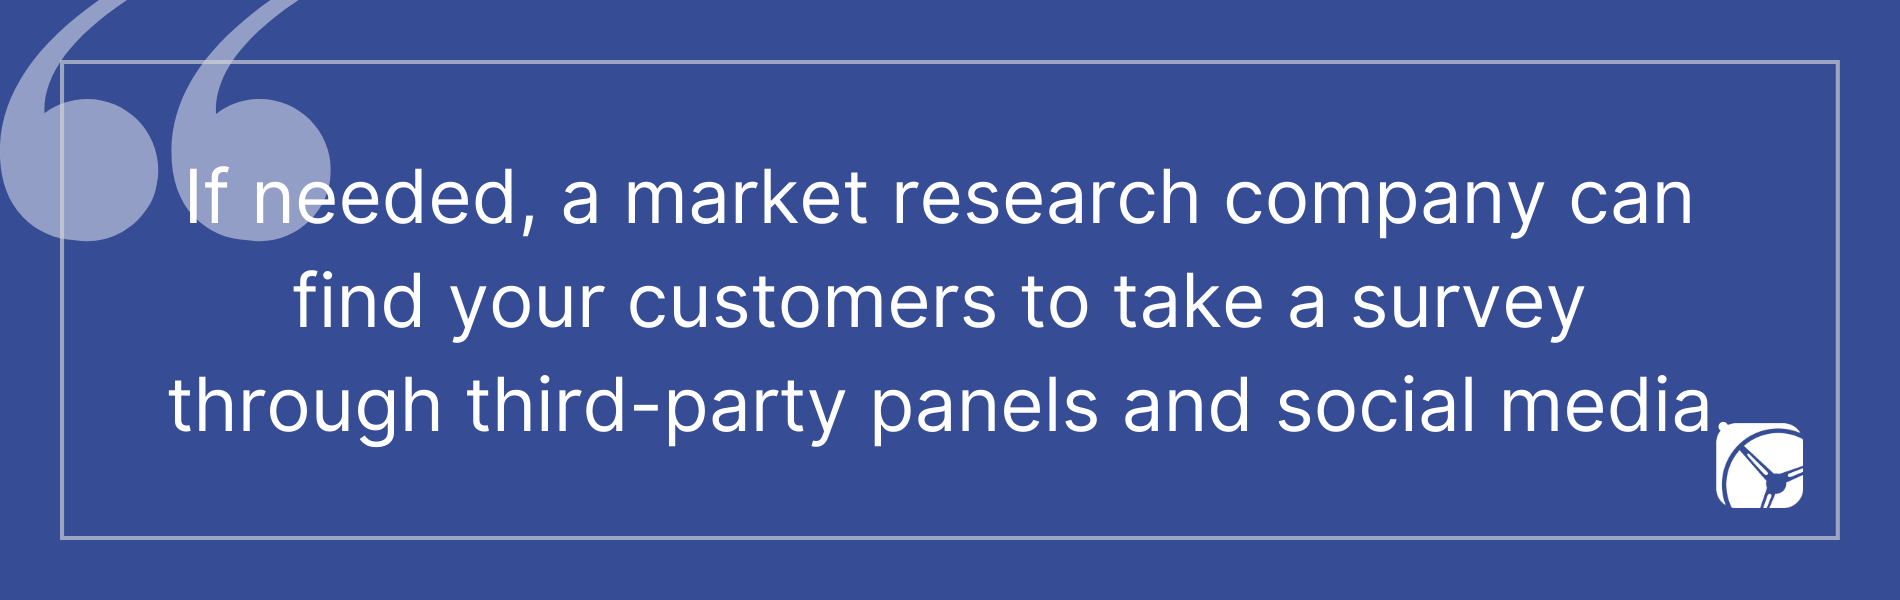 If needed, a market research company can find your customers to take a survey through third-party panels and social media.